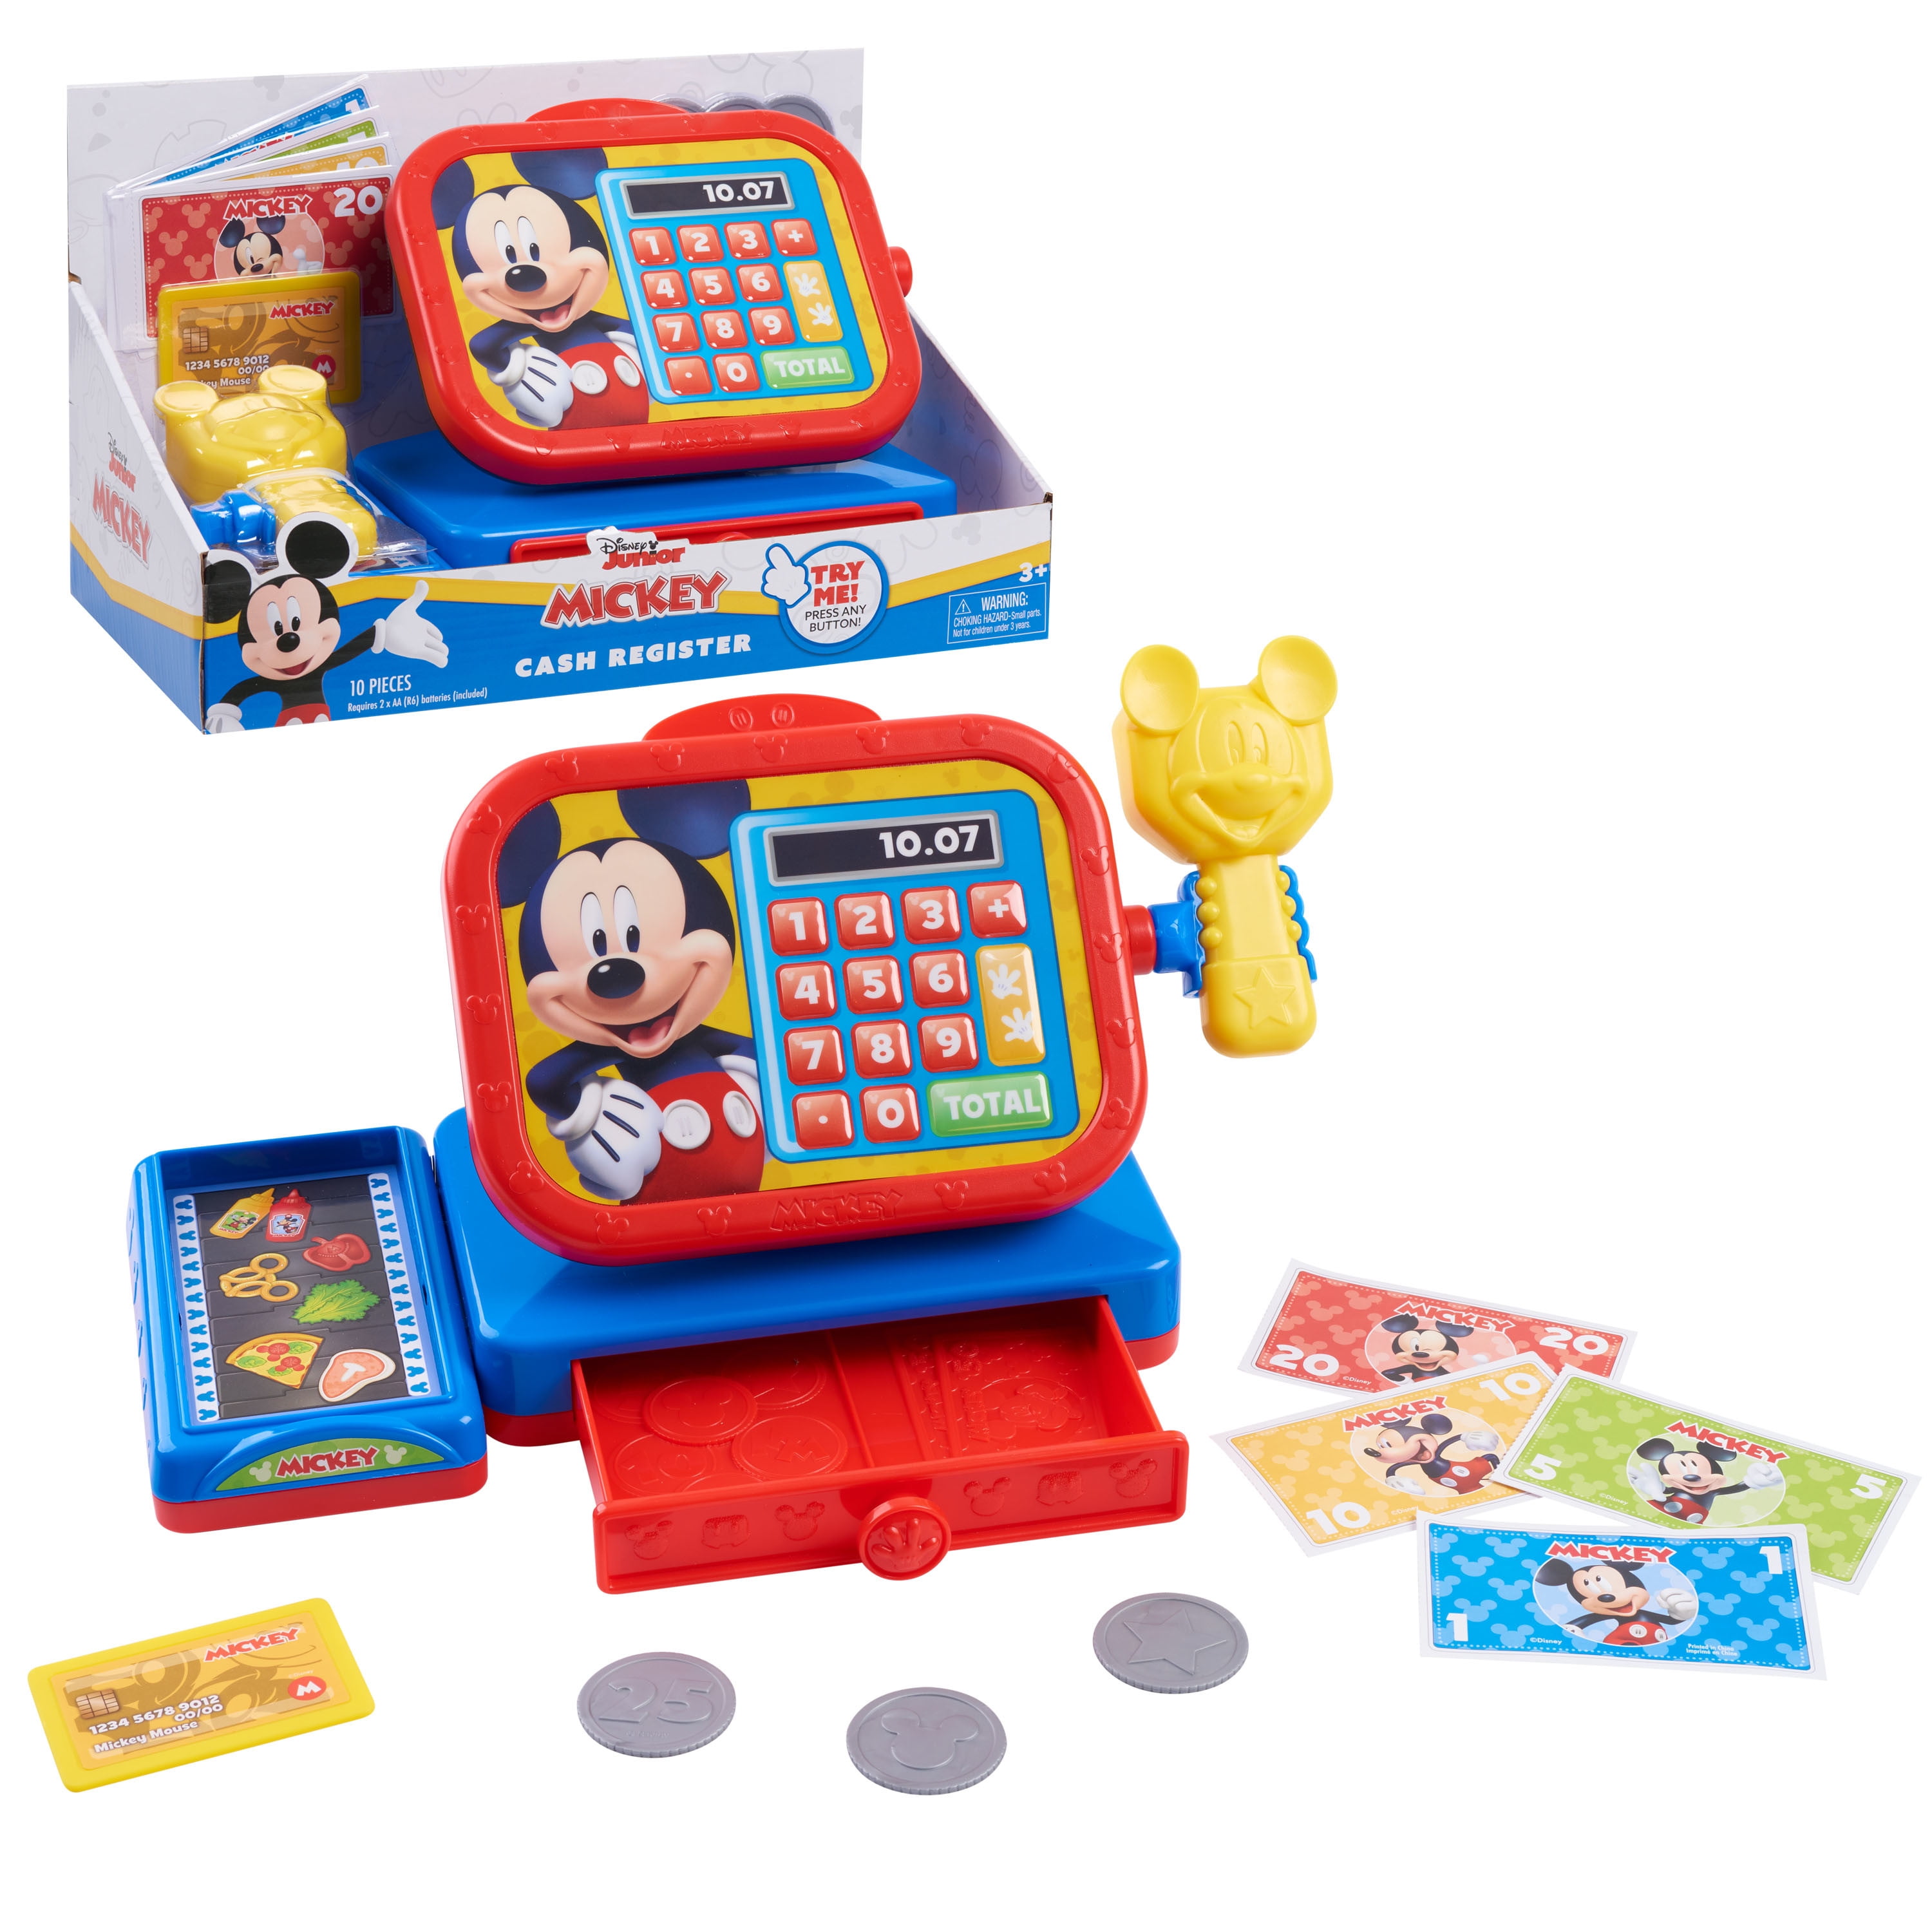 Mickey Mouse Clubhouse Handy Helper Tool Box Details about   NEW Disney Junior Jr Ages 3+ 